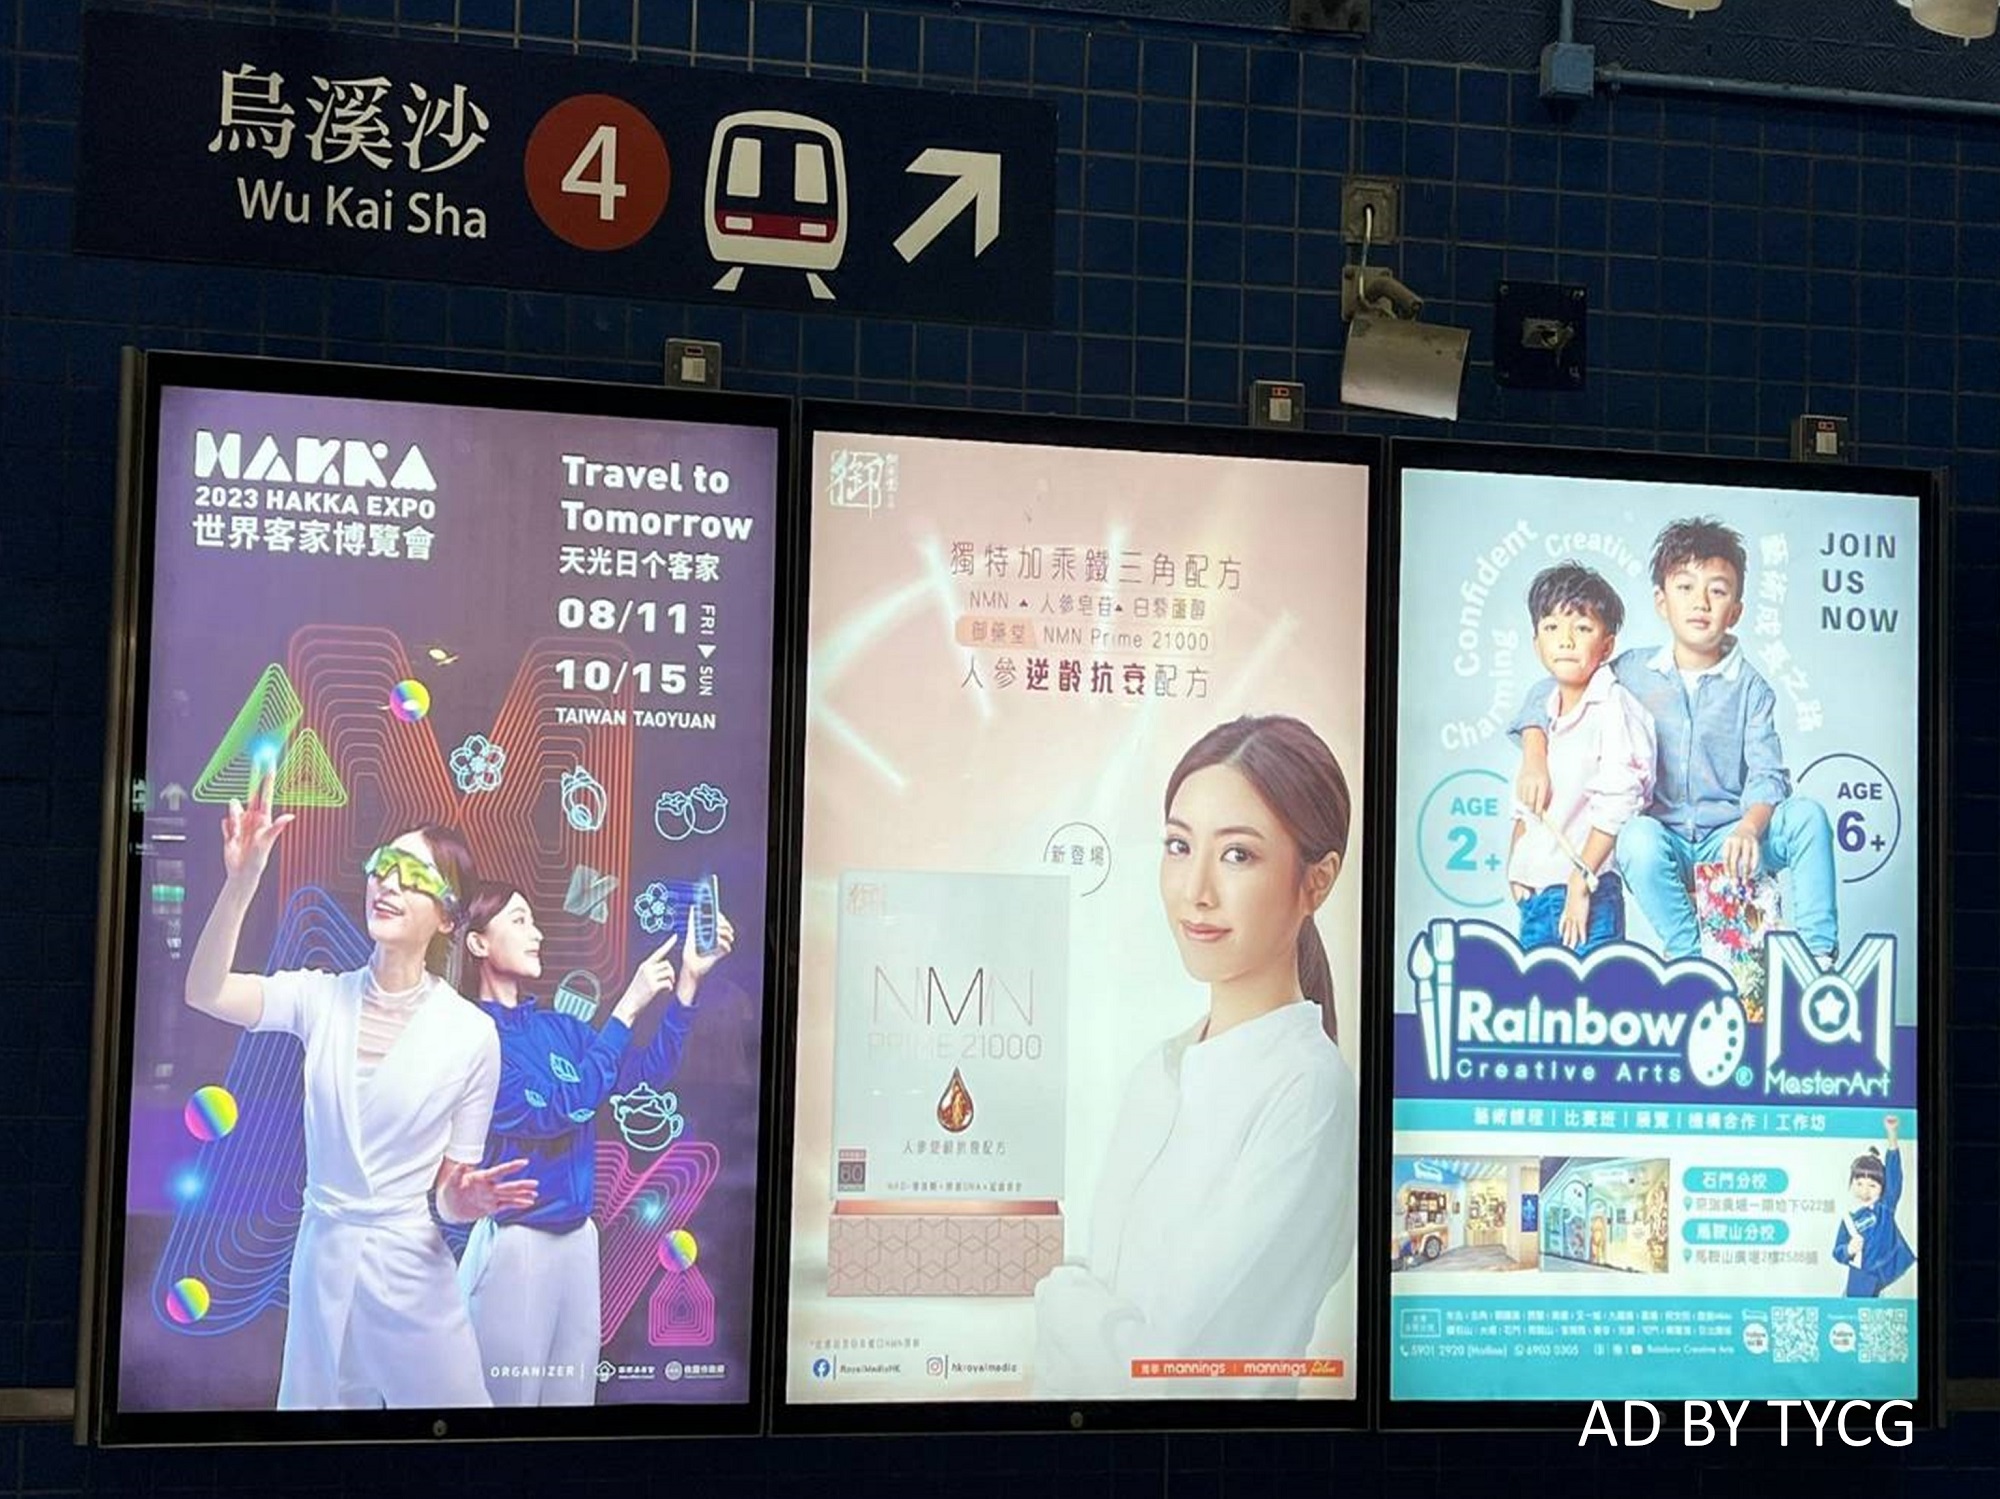 The theme of 2023 Hakka Expo, “Travel to Tomorrow”, which showcases the future of Hakka, can be seen on the lightbox ad at an MTR station in Hong Kong.